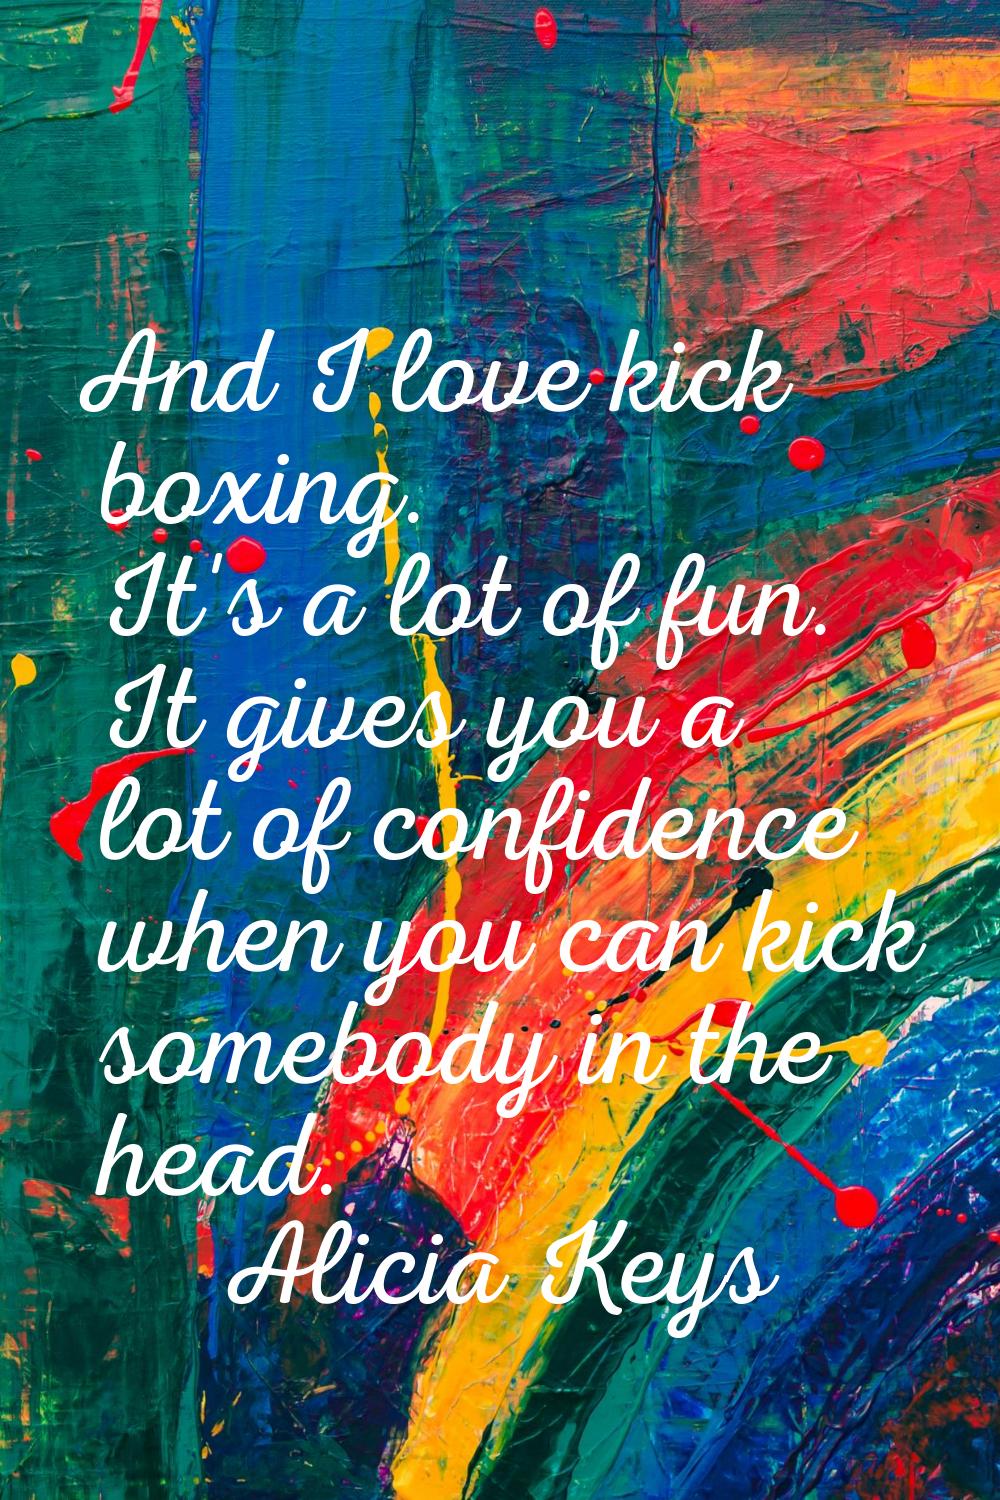 And I love kick boxing. It's a lot of fun. It gives you a lot of confidence when you can kick someb